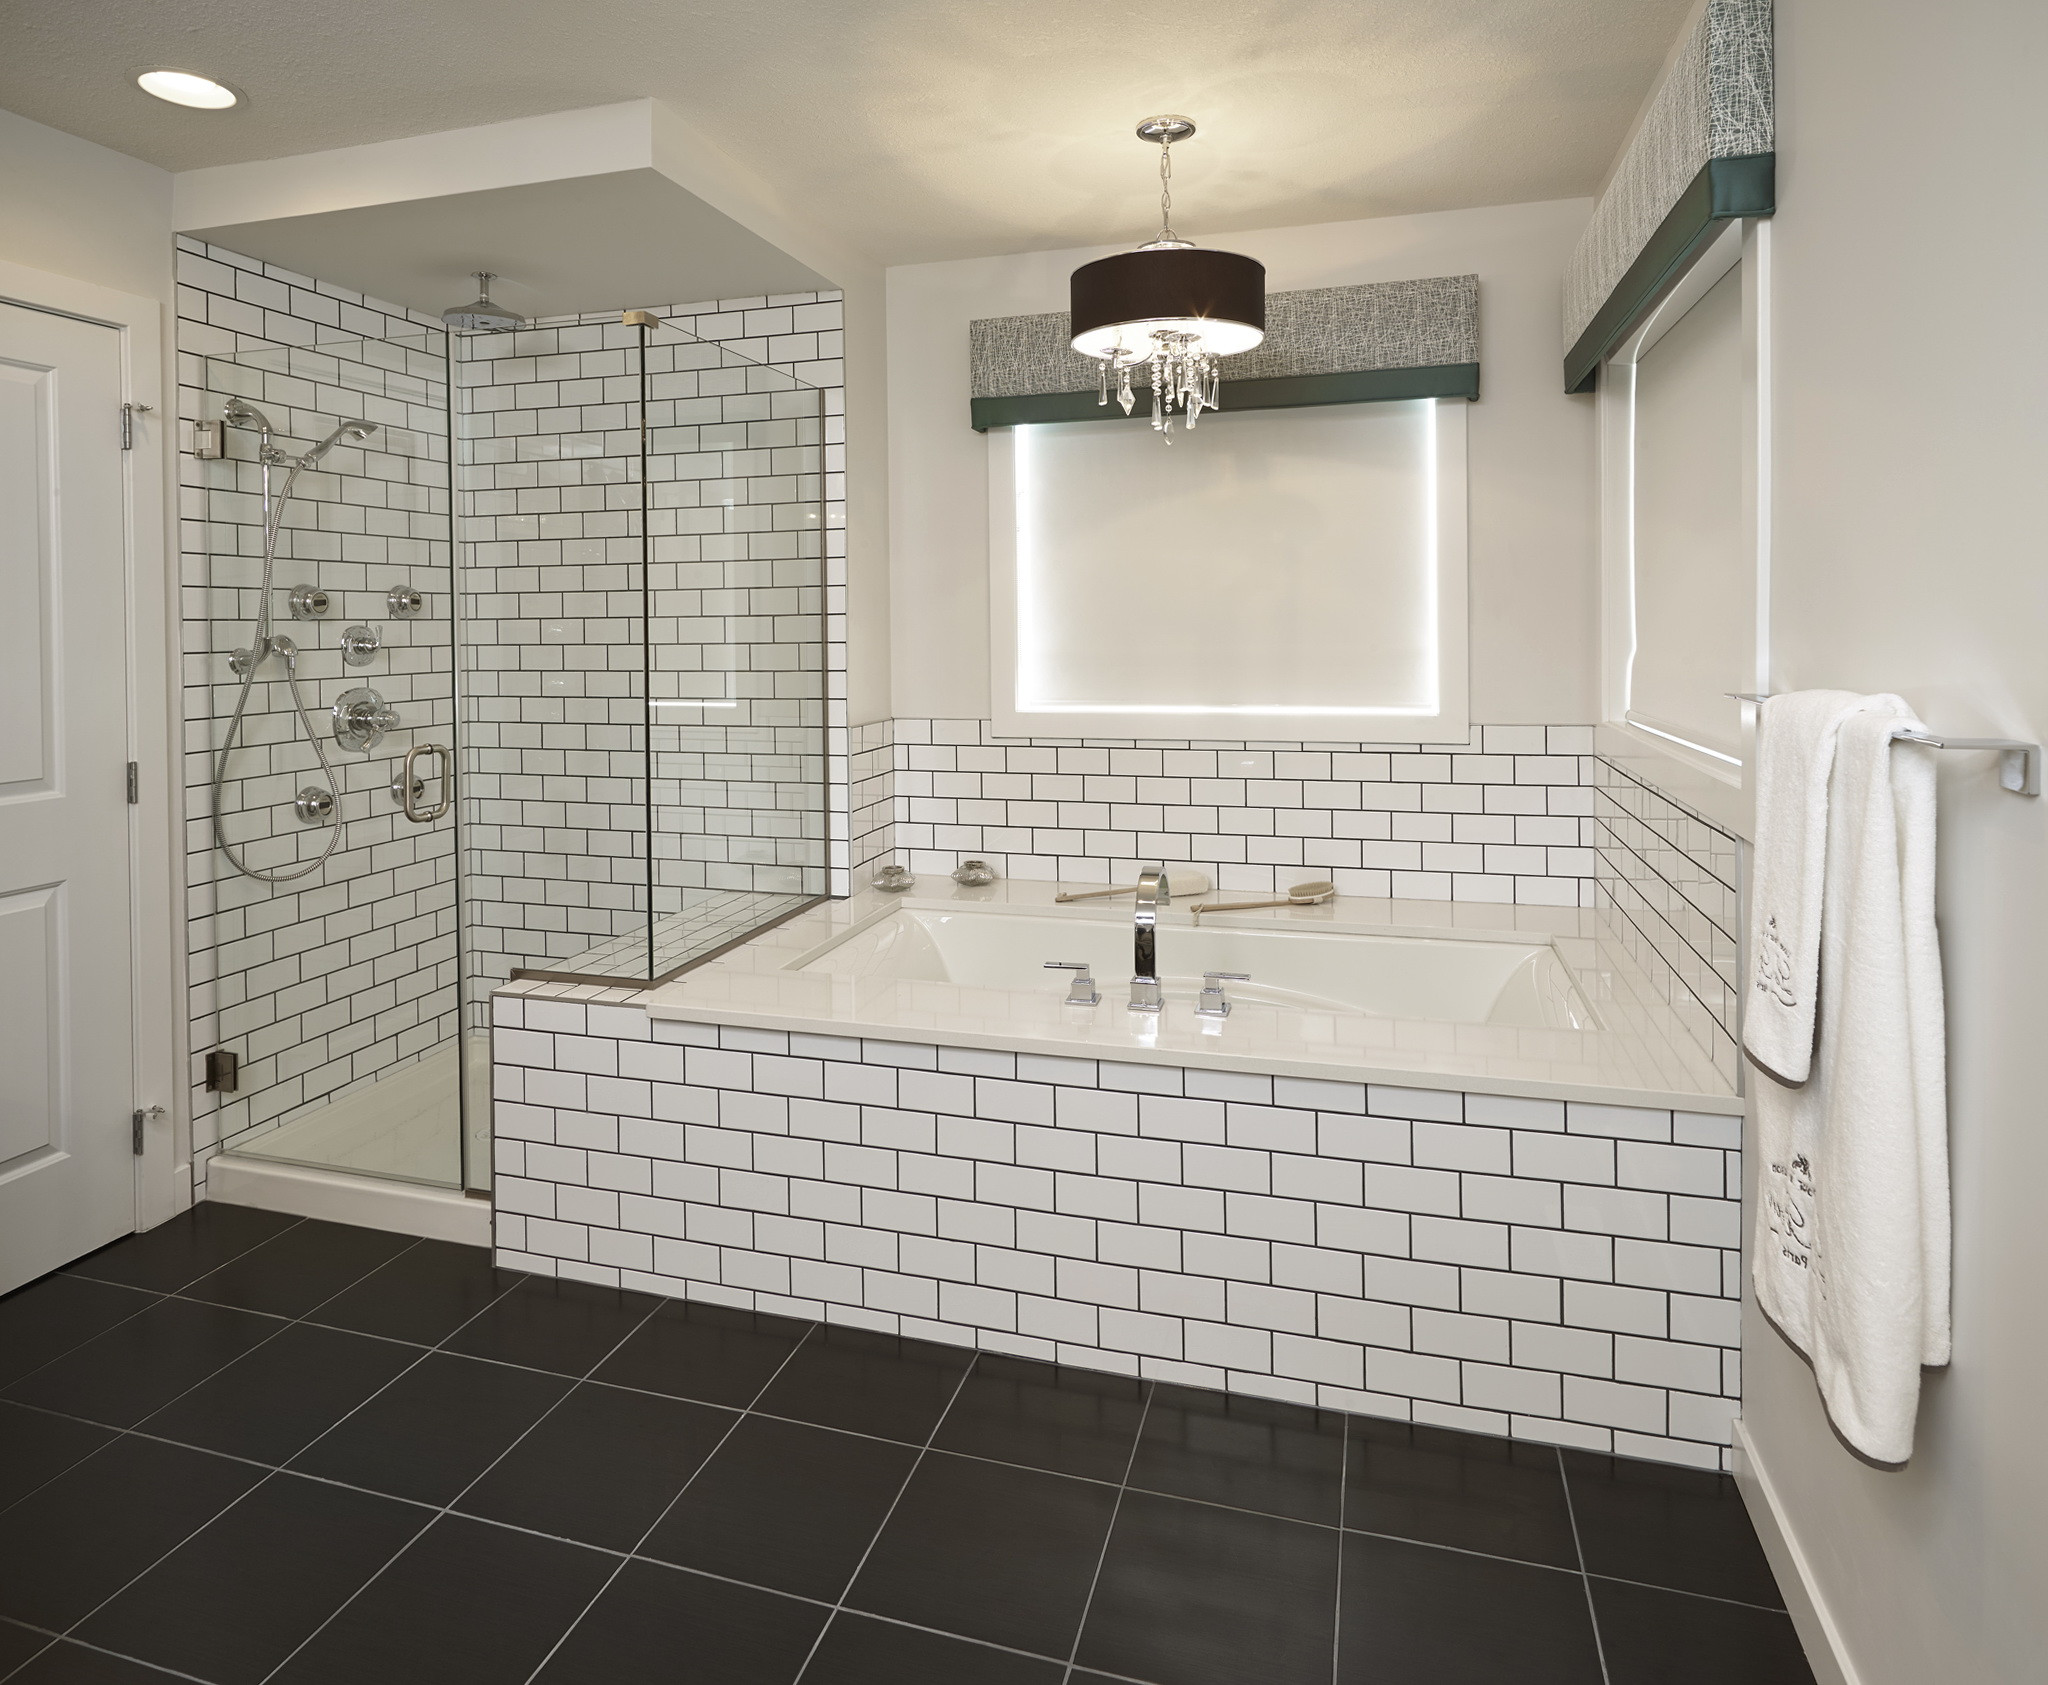 Home Depot Bathroom Tiles
 Bathroom Subway Tile Bathrooms For Your Dream Shower And